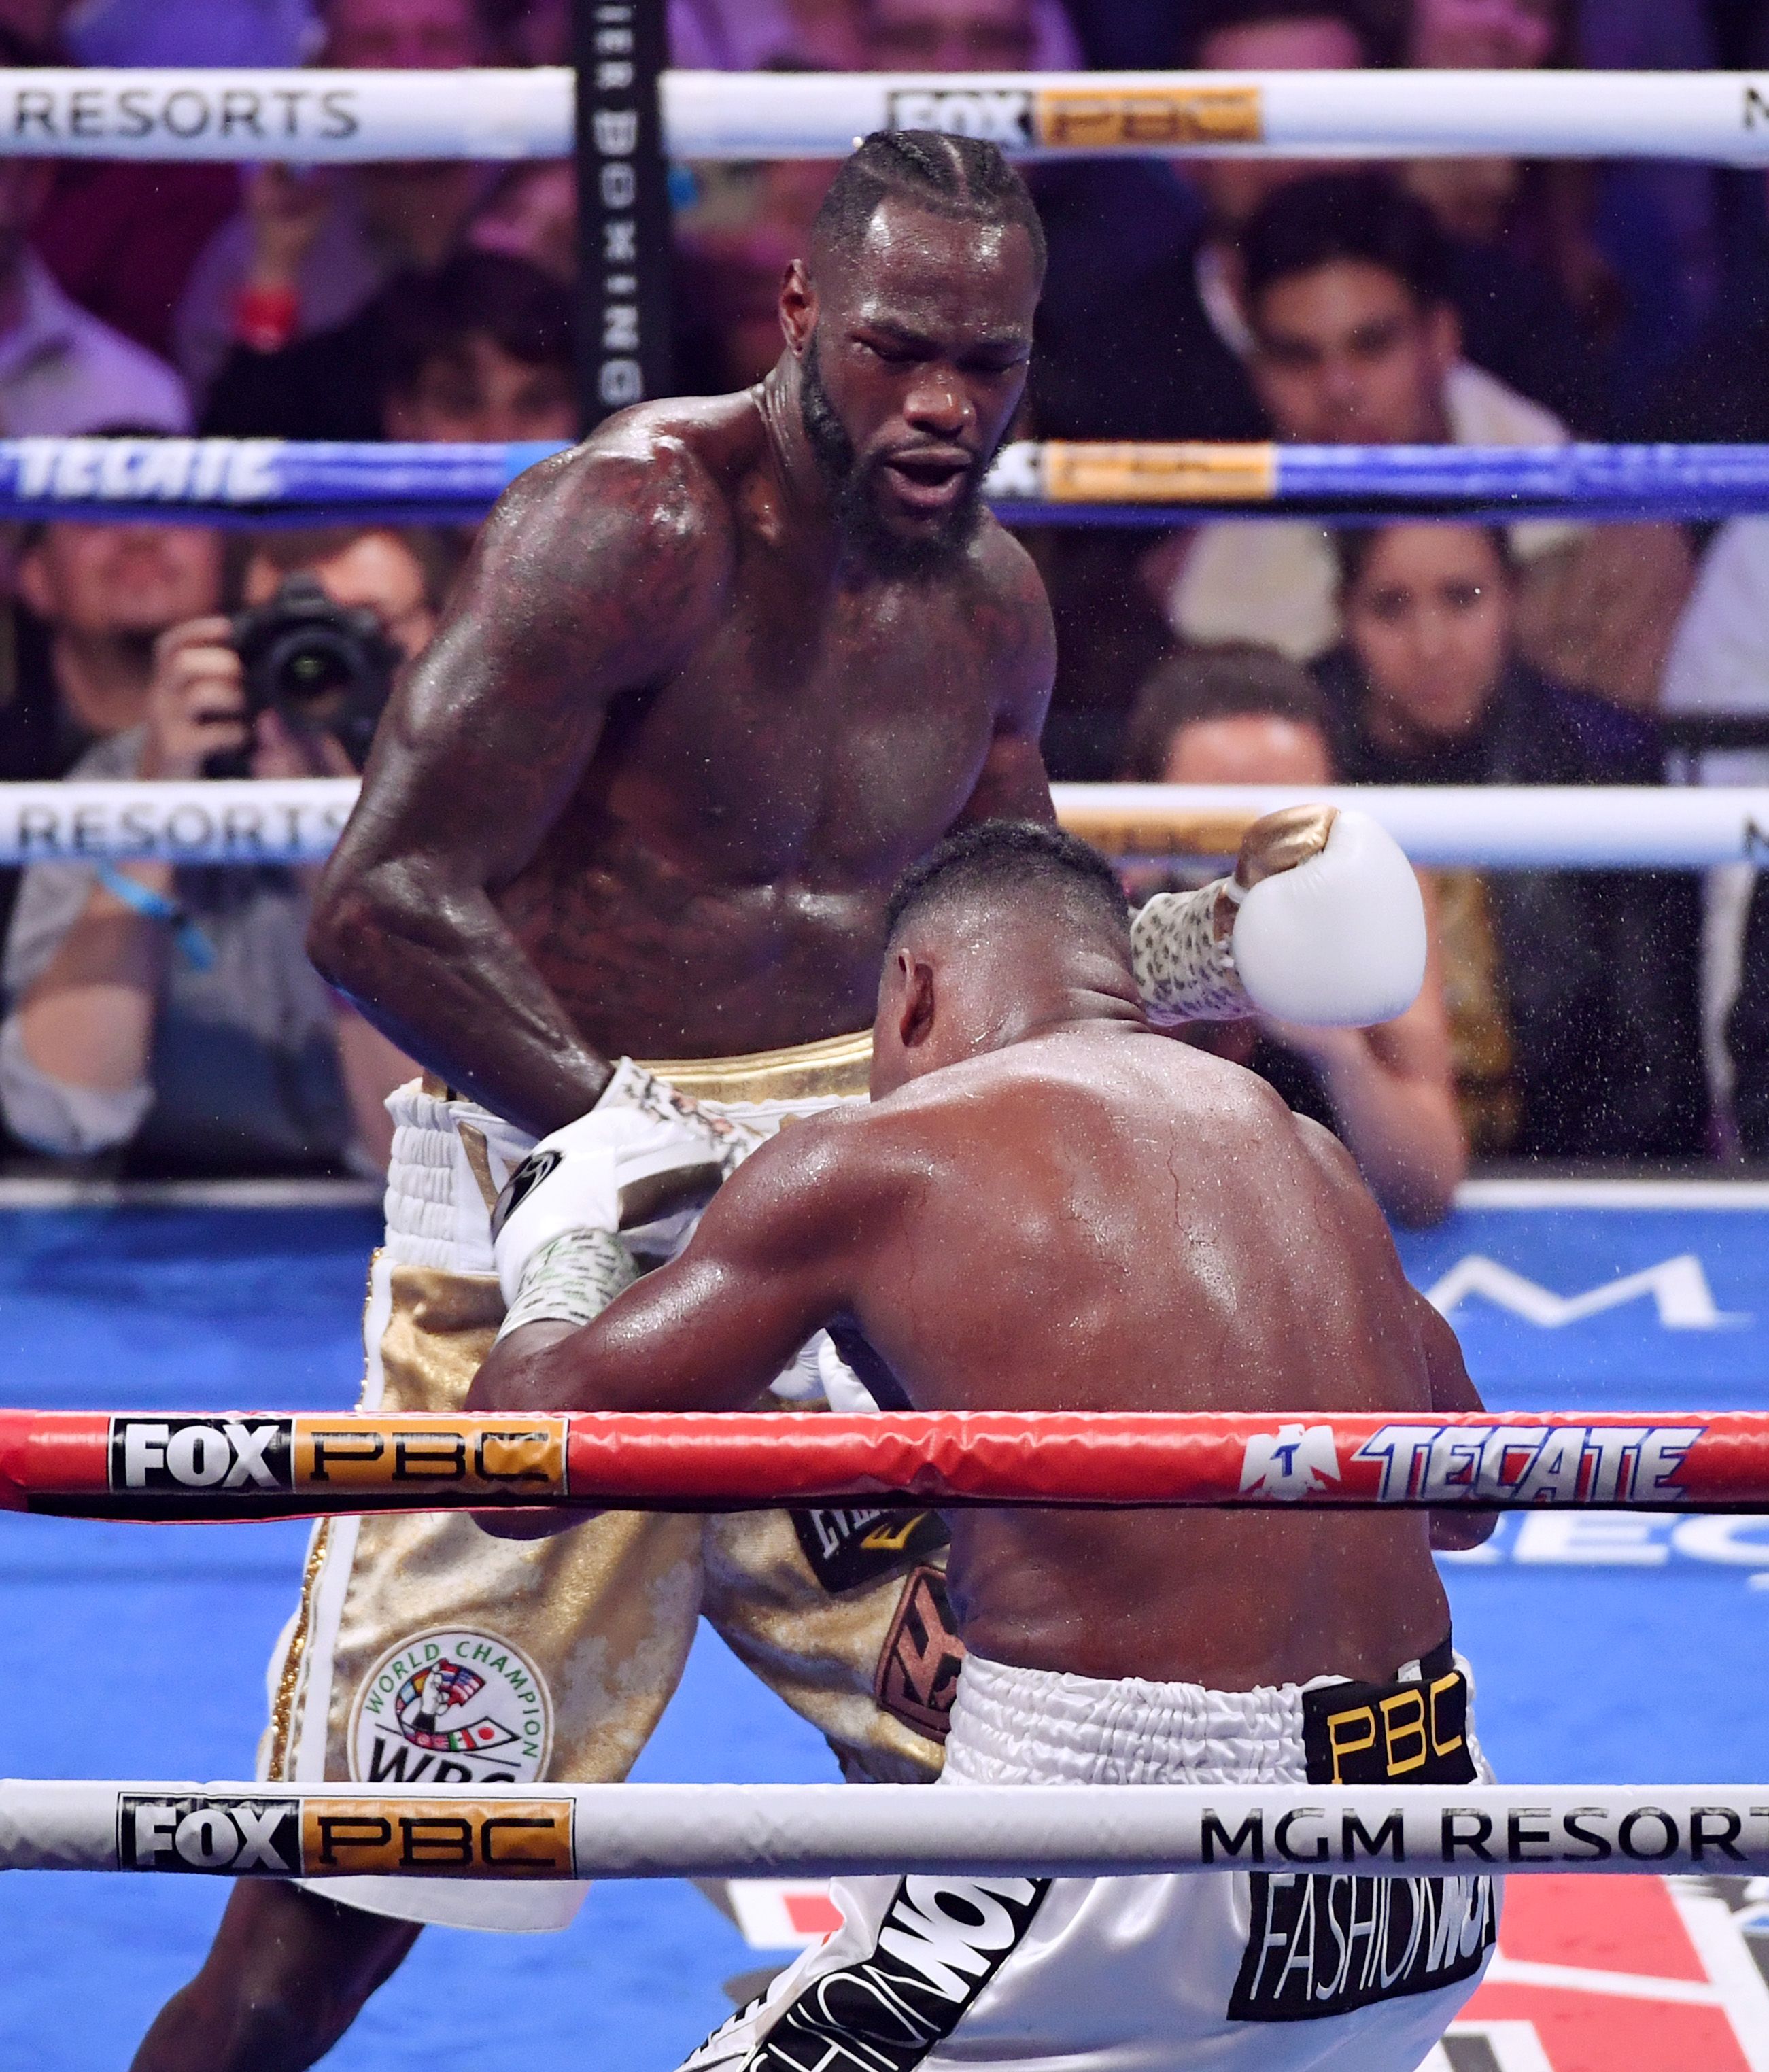 Deontay Wilder lands a massive punch